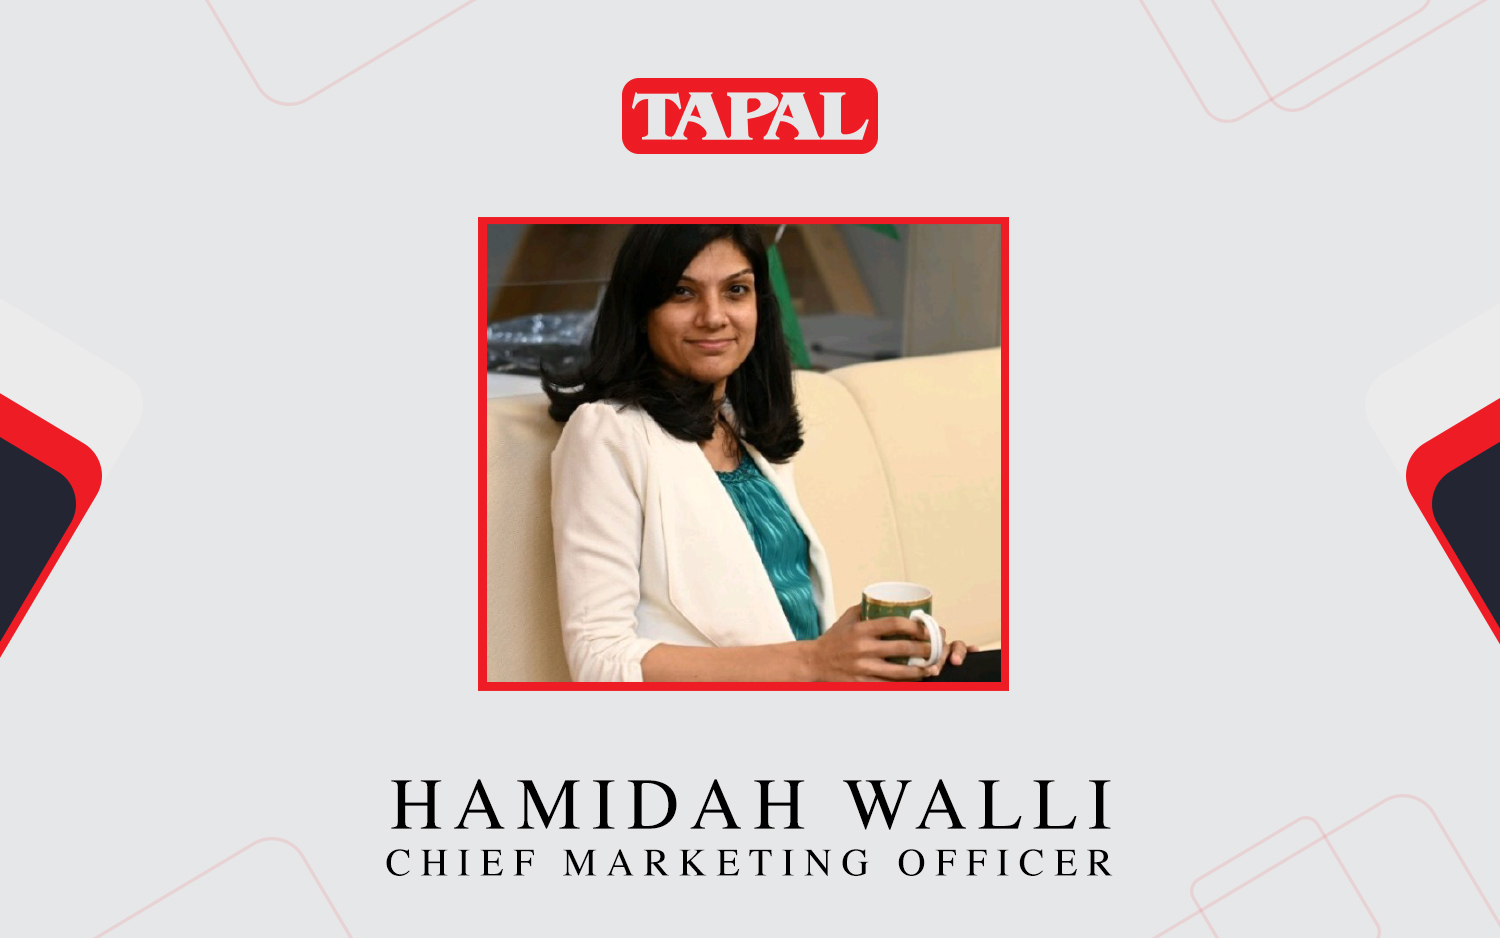 Tapal appoints Hamidah Wali as Chief Marketing Officer